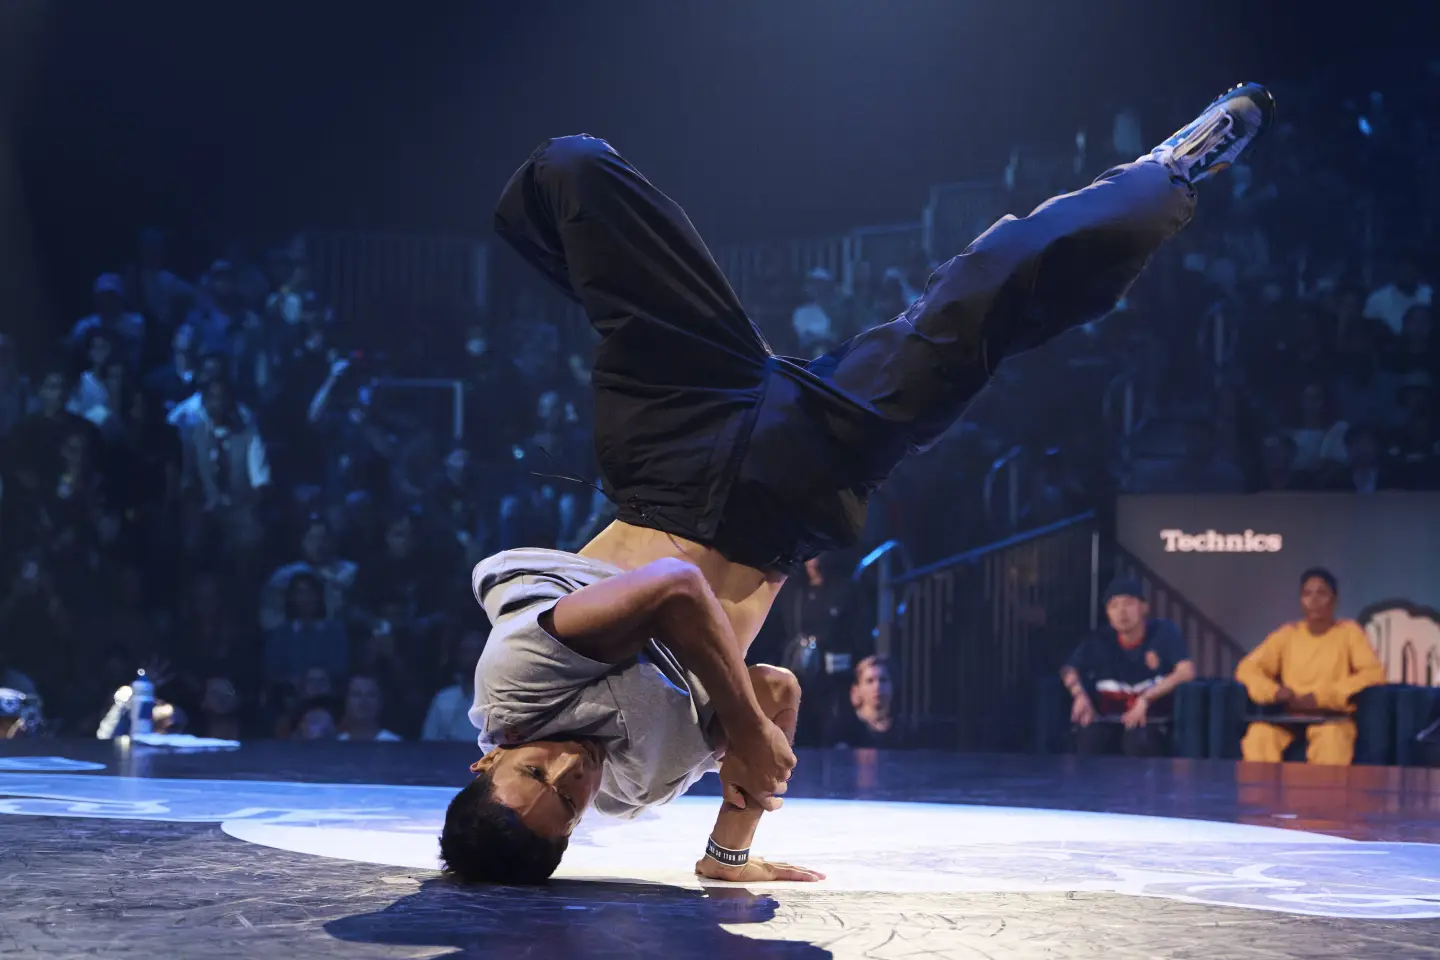 Victor Montalvo of the U.S. performs at Red Bull BC One World Final in New York, November 12, 2022. /AP